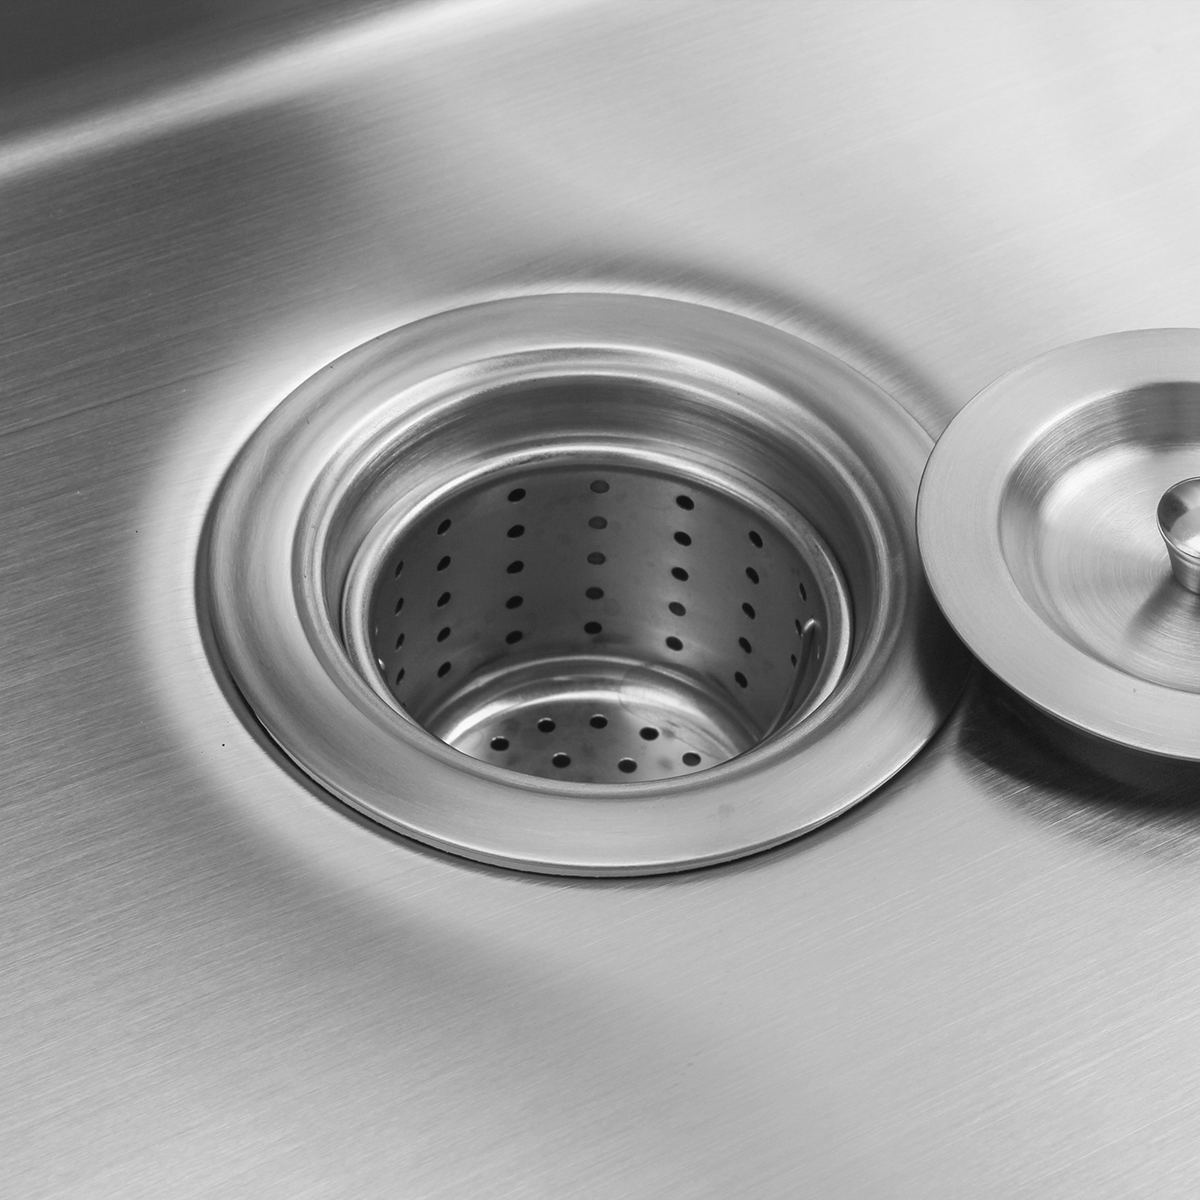 18 Gauge 304 Stainless Steel Handmade Undermount PVD Nano Kitchen Sink with Bottom Grid Drain Assembly